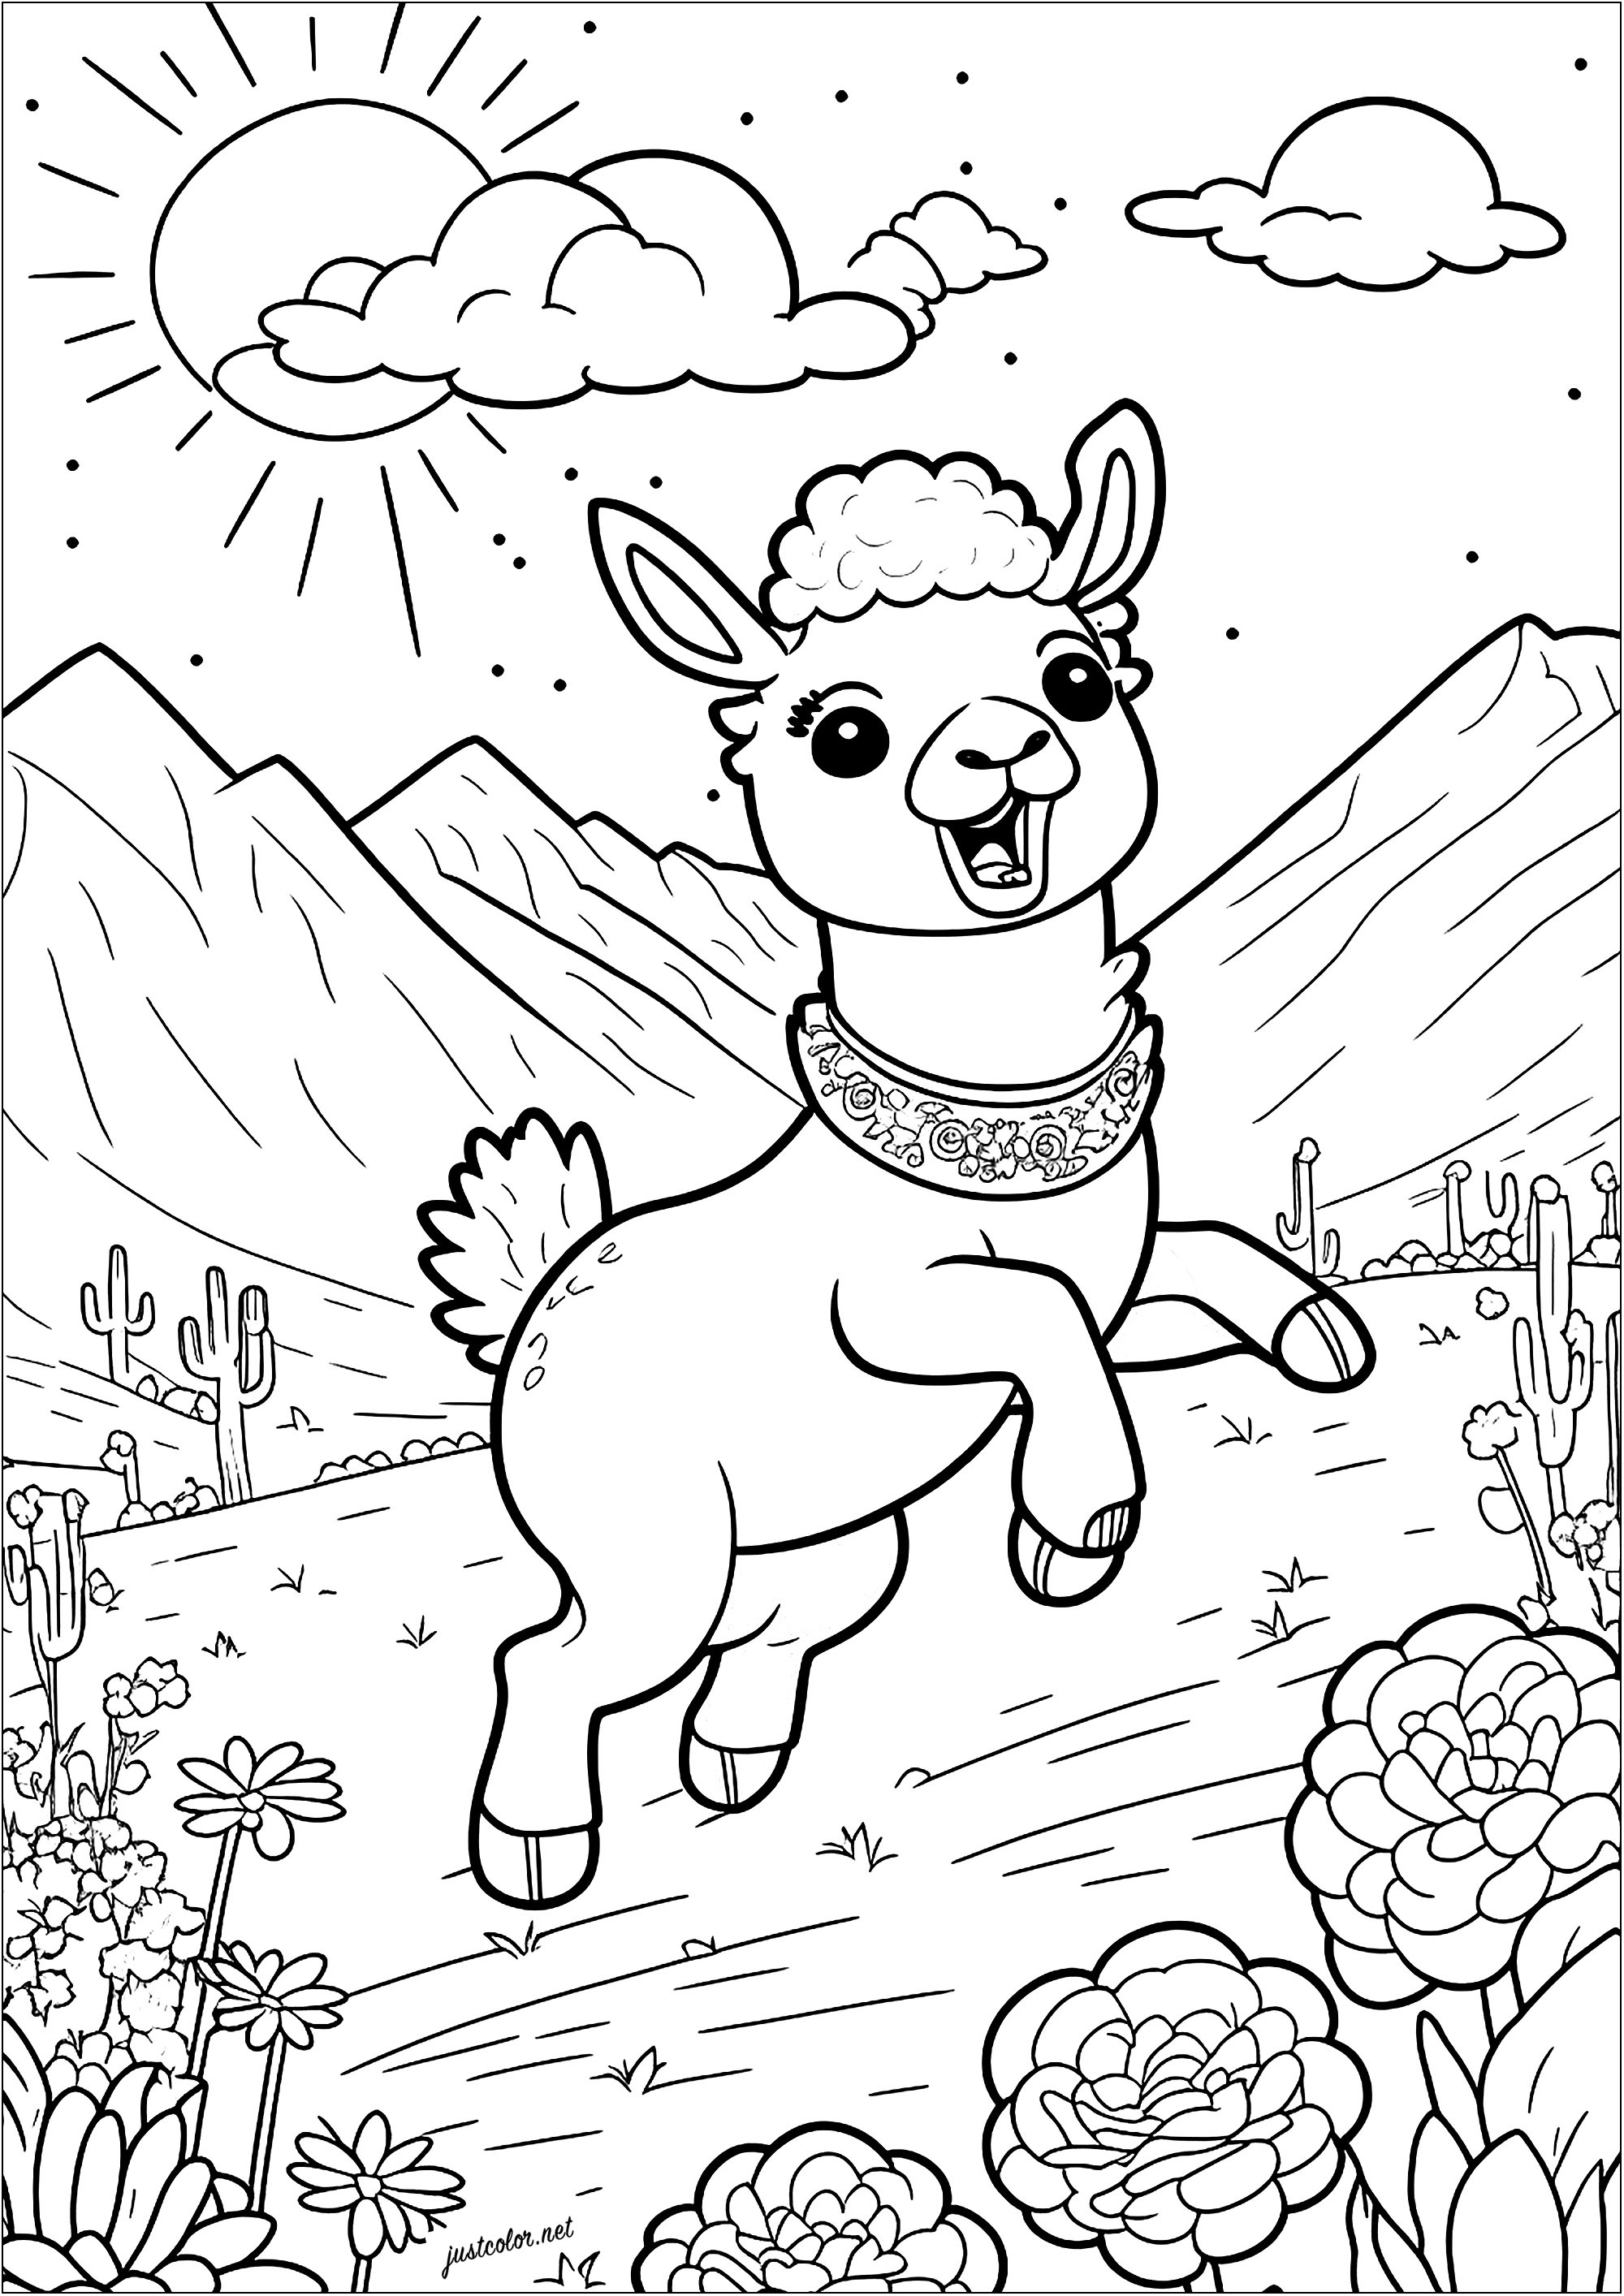 Coloring of a young llama jumping in a mountainous, flowery landscape. This young llama's long ears point skywards, and his big eyes sparkle with excitement. Don't forget to color in the cacti at the foot of the mountains, and the pretty flowers in the foreground.